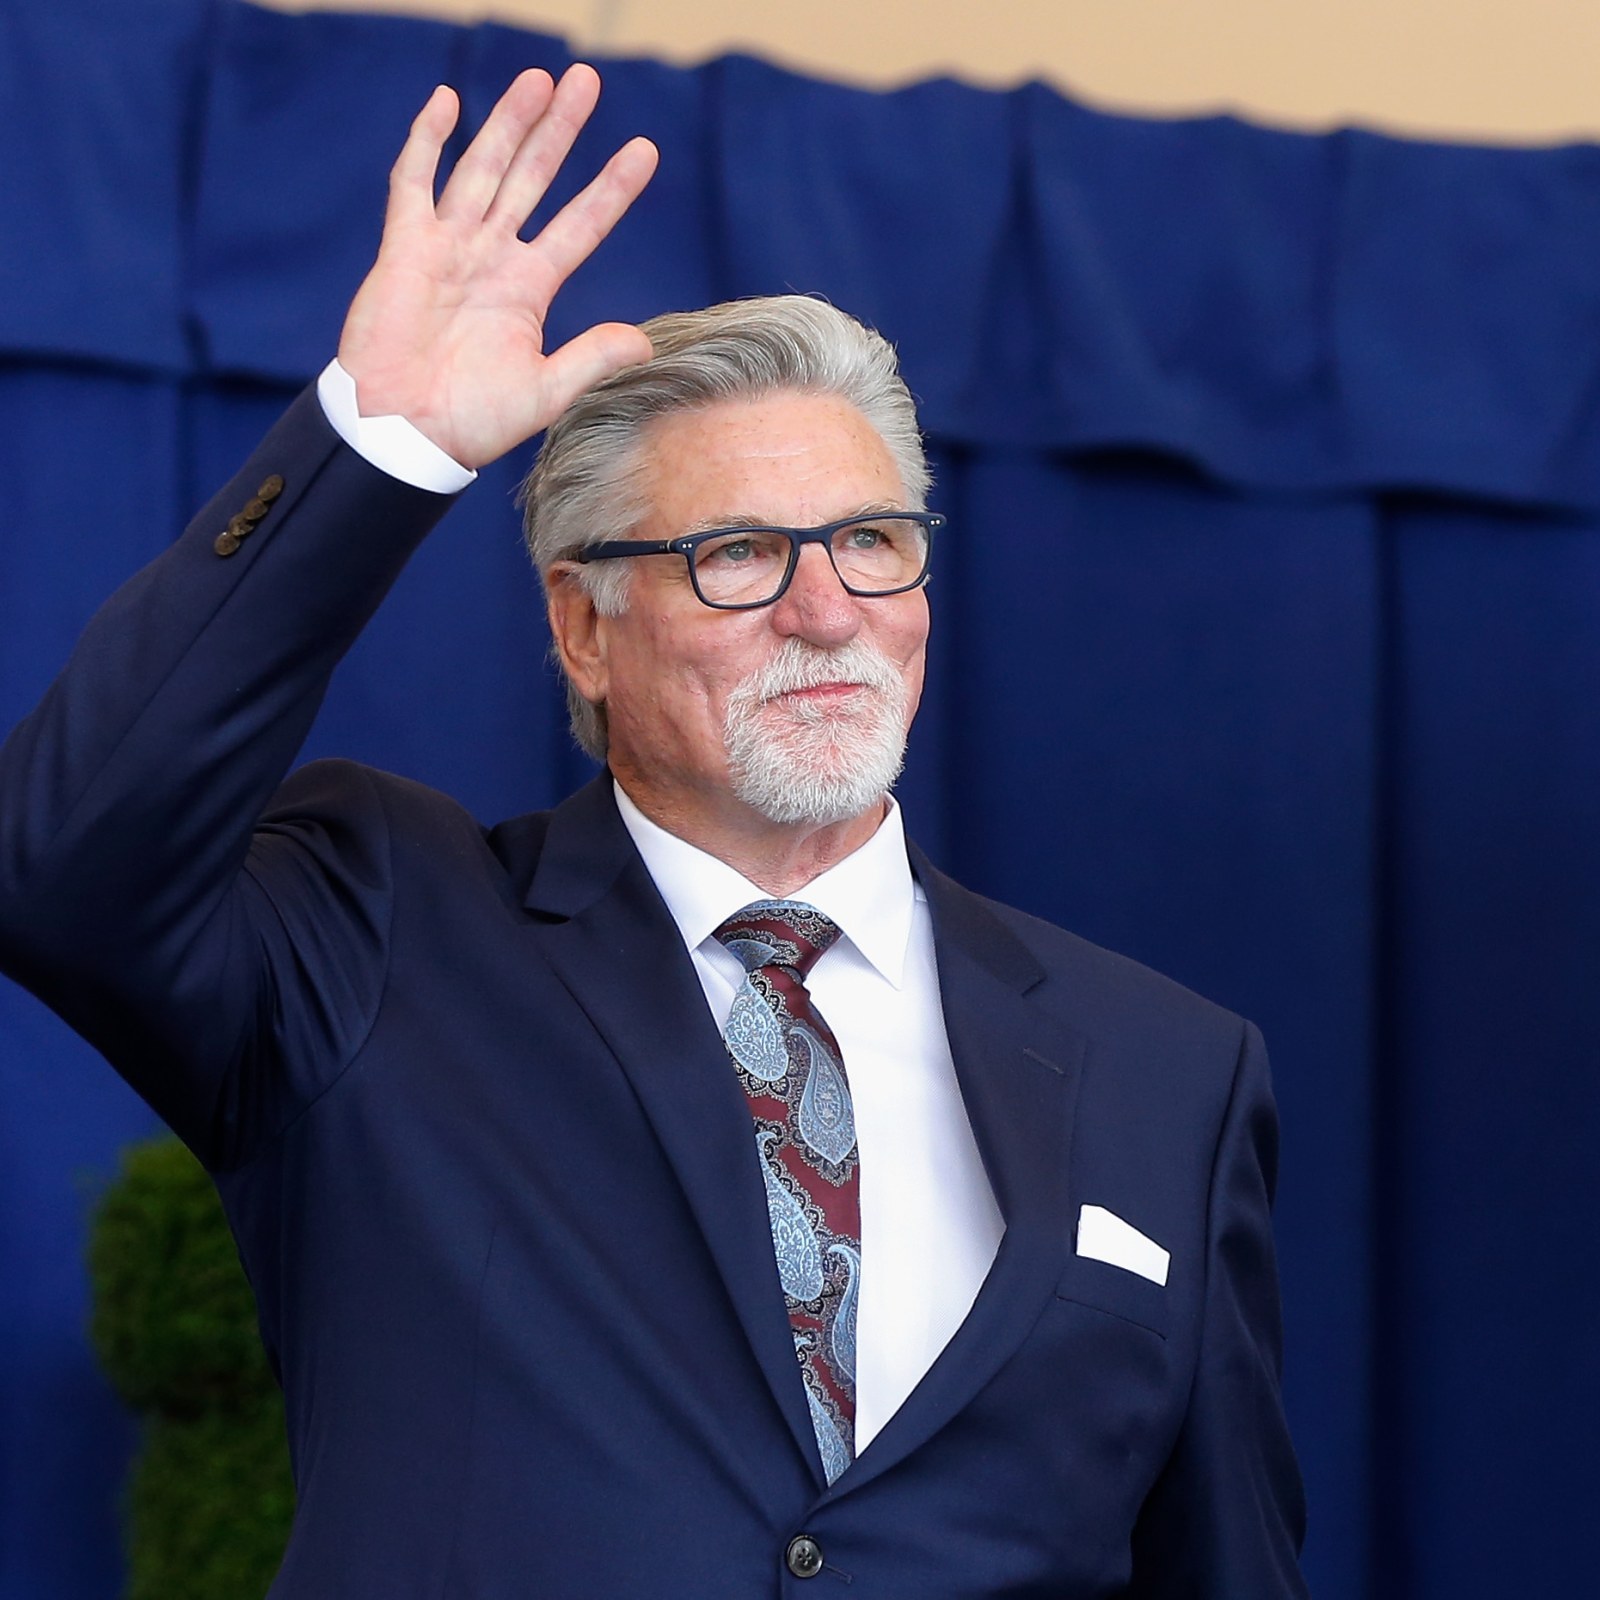 Tigers' TV analyst Jack Morris apologizes for perceived racist